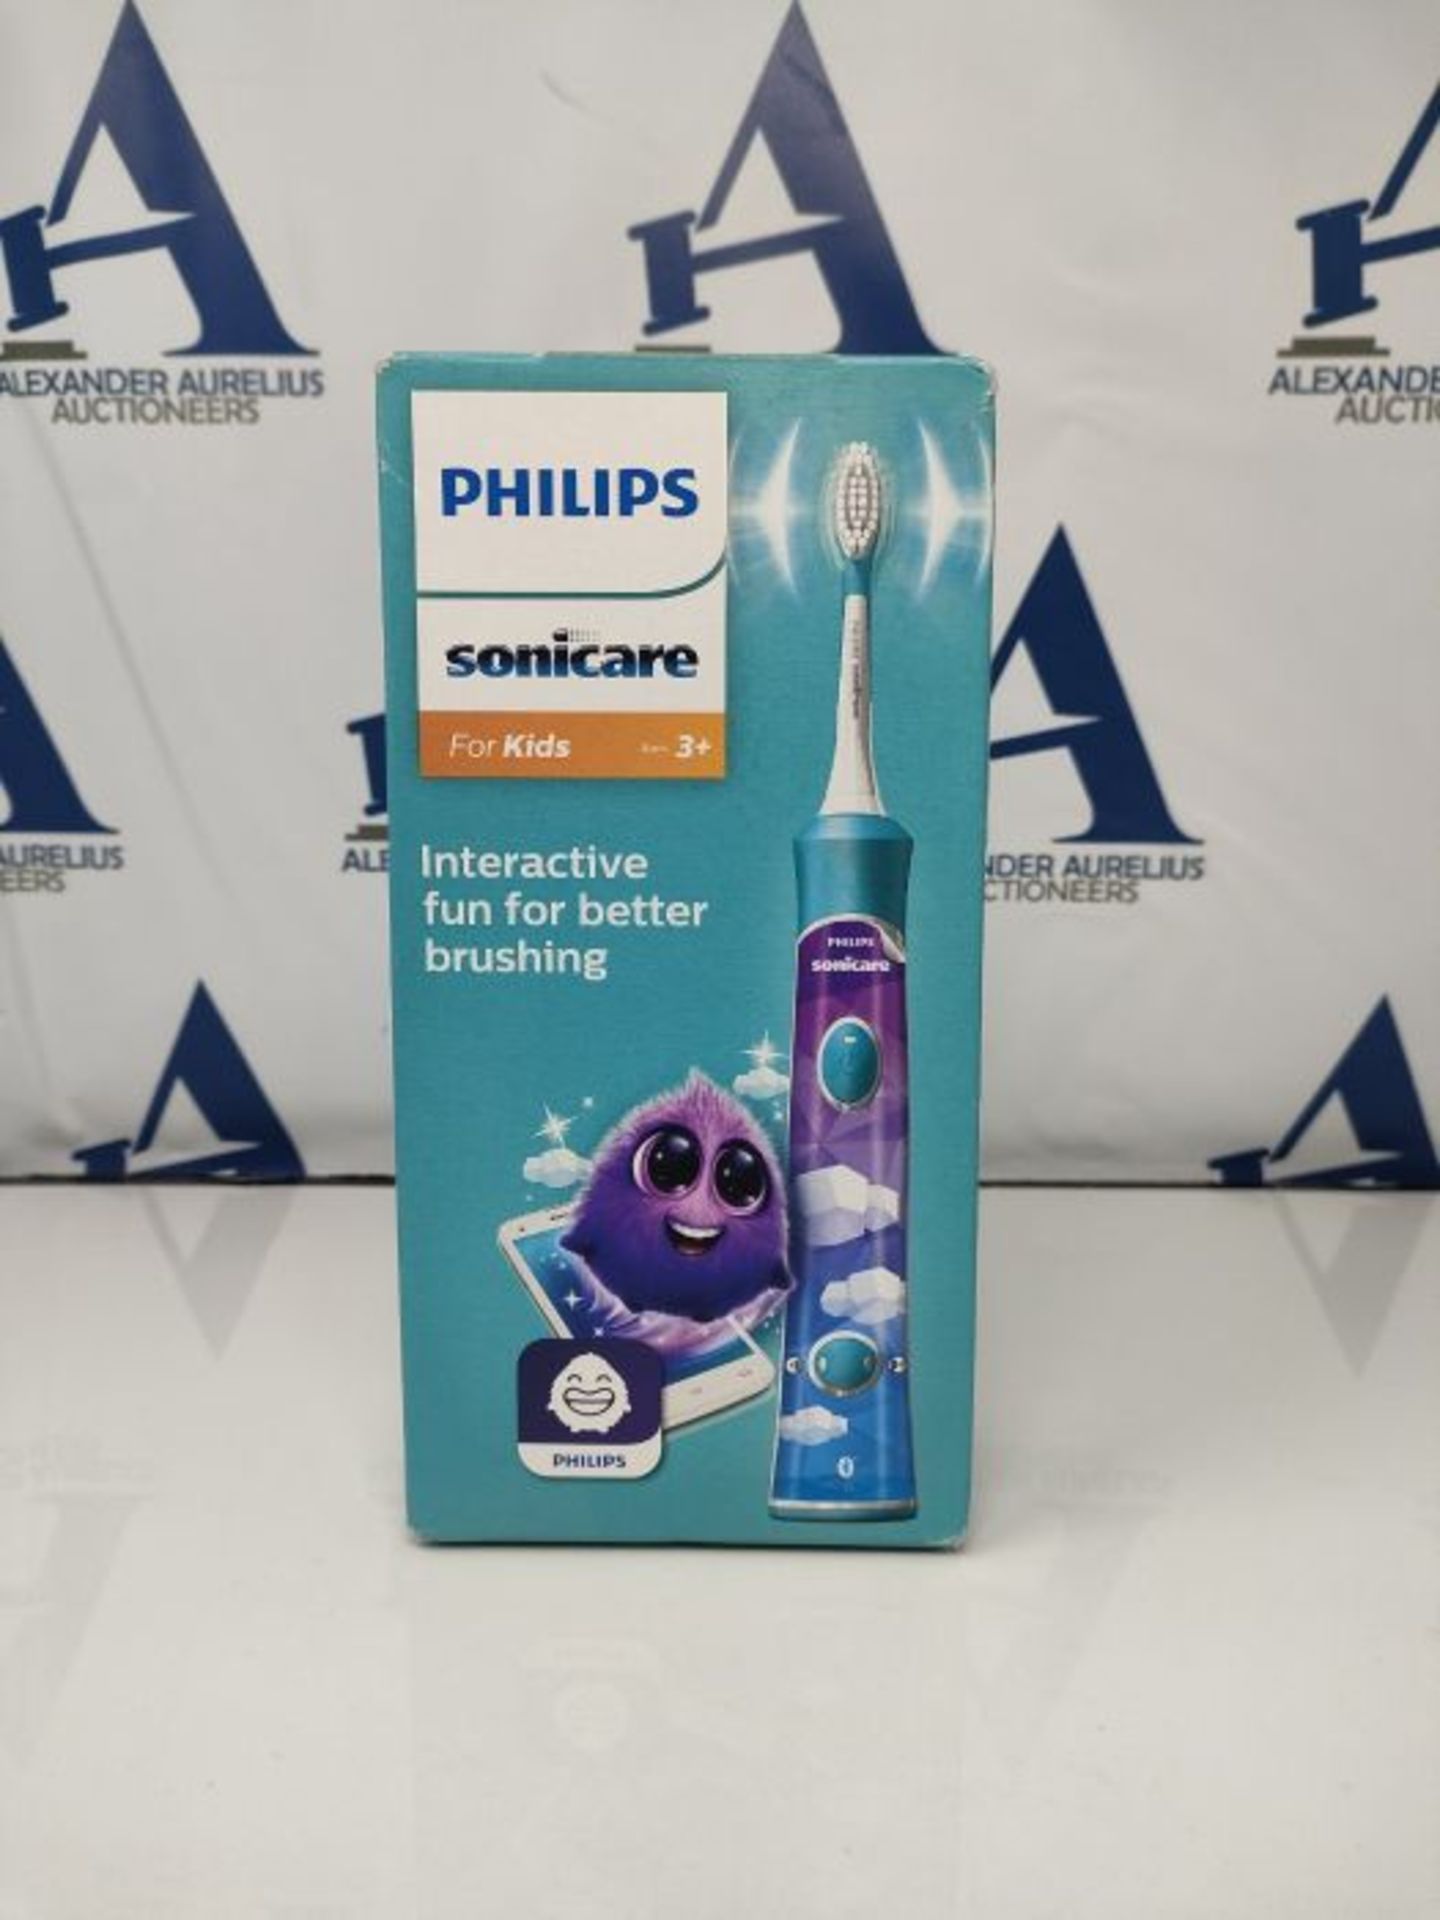 Philips Sonicare For Kids Electric Toothbrush HX6322 / 04, With Sound Technology, For - Image 2 of 3